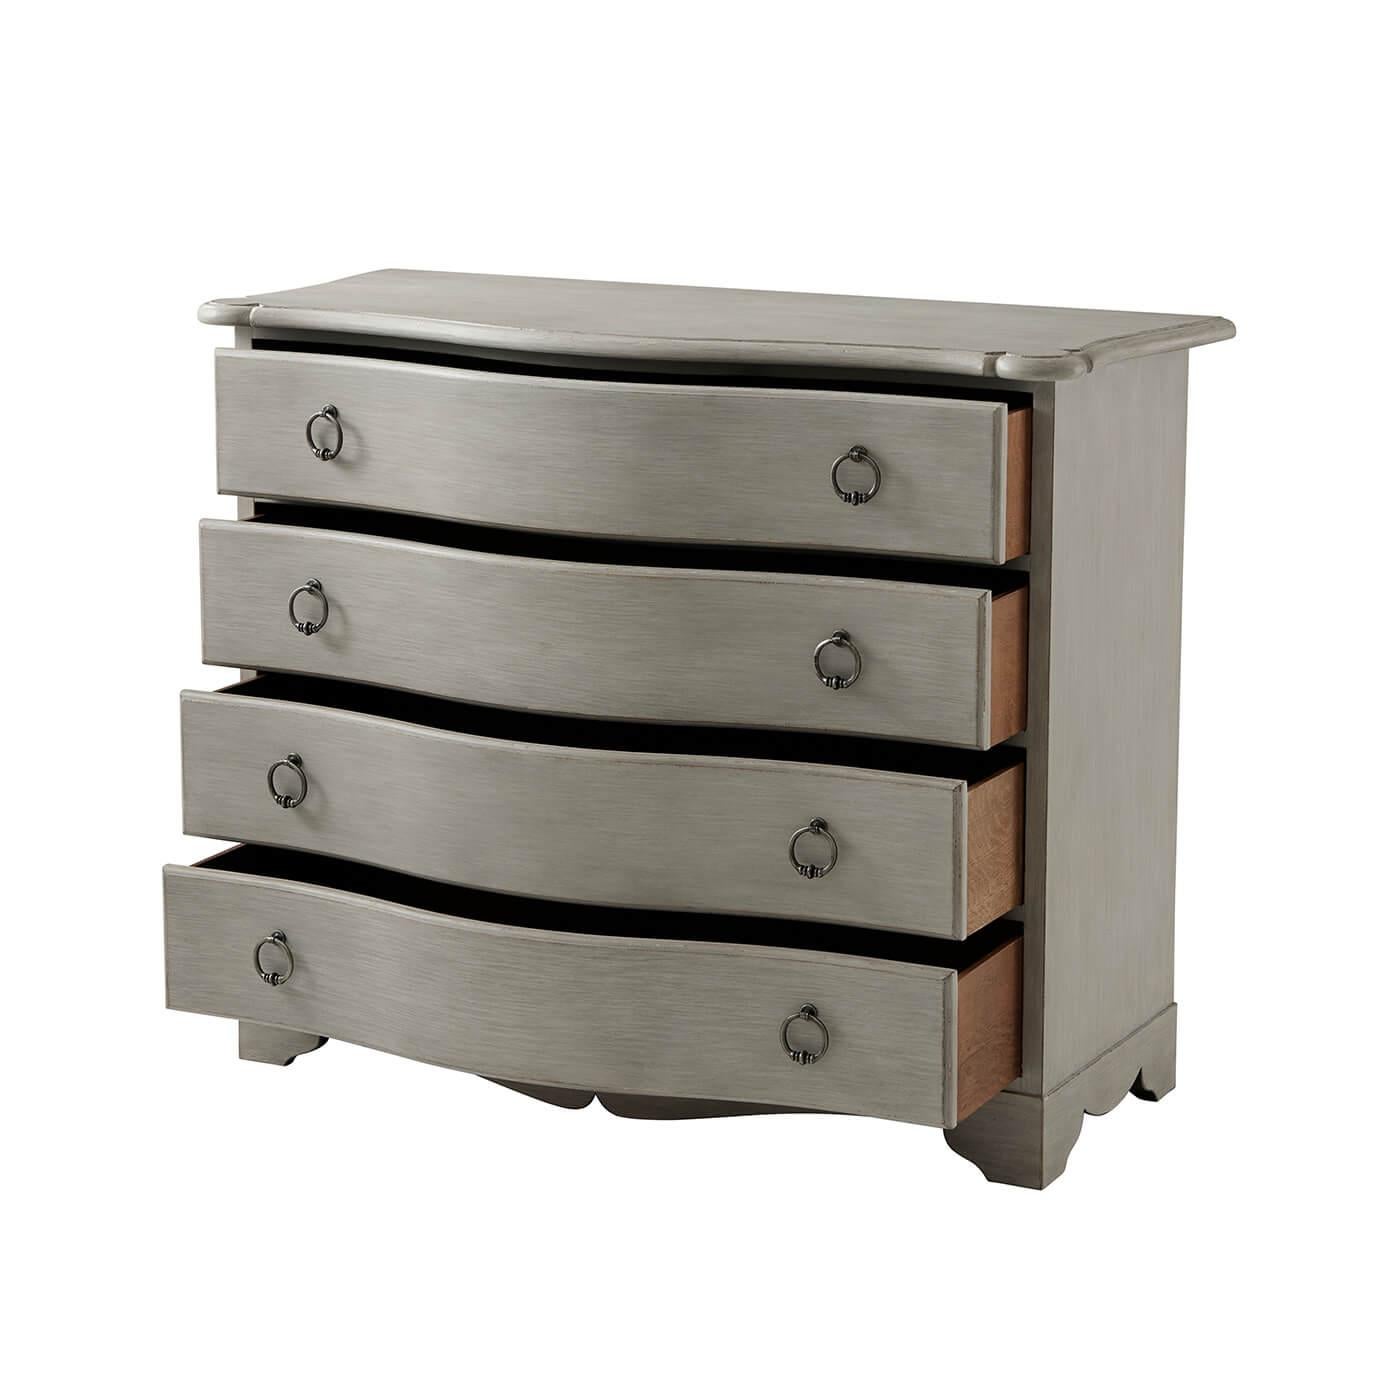 Georgian style serpentine four drawer chest with a warm walnut finish, a molded serpentine edge top, with four serpentine drawers with drop ring handles, a shaped apron on bracket feet. Variations are expected in the hand-rubbed and distressed